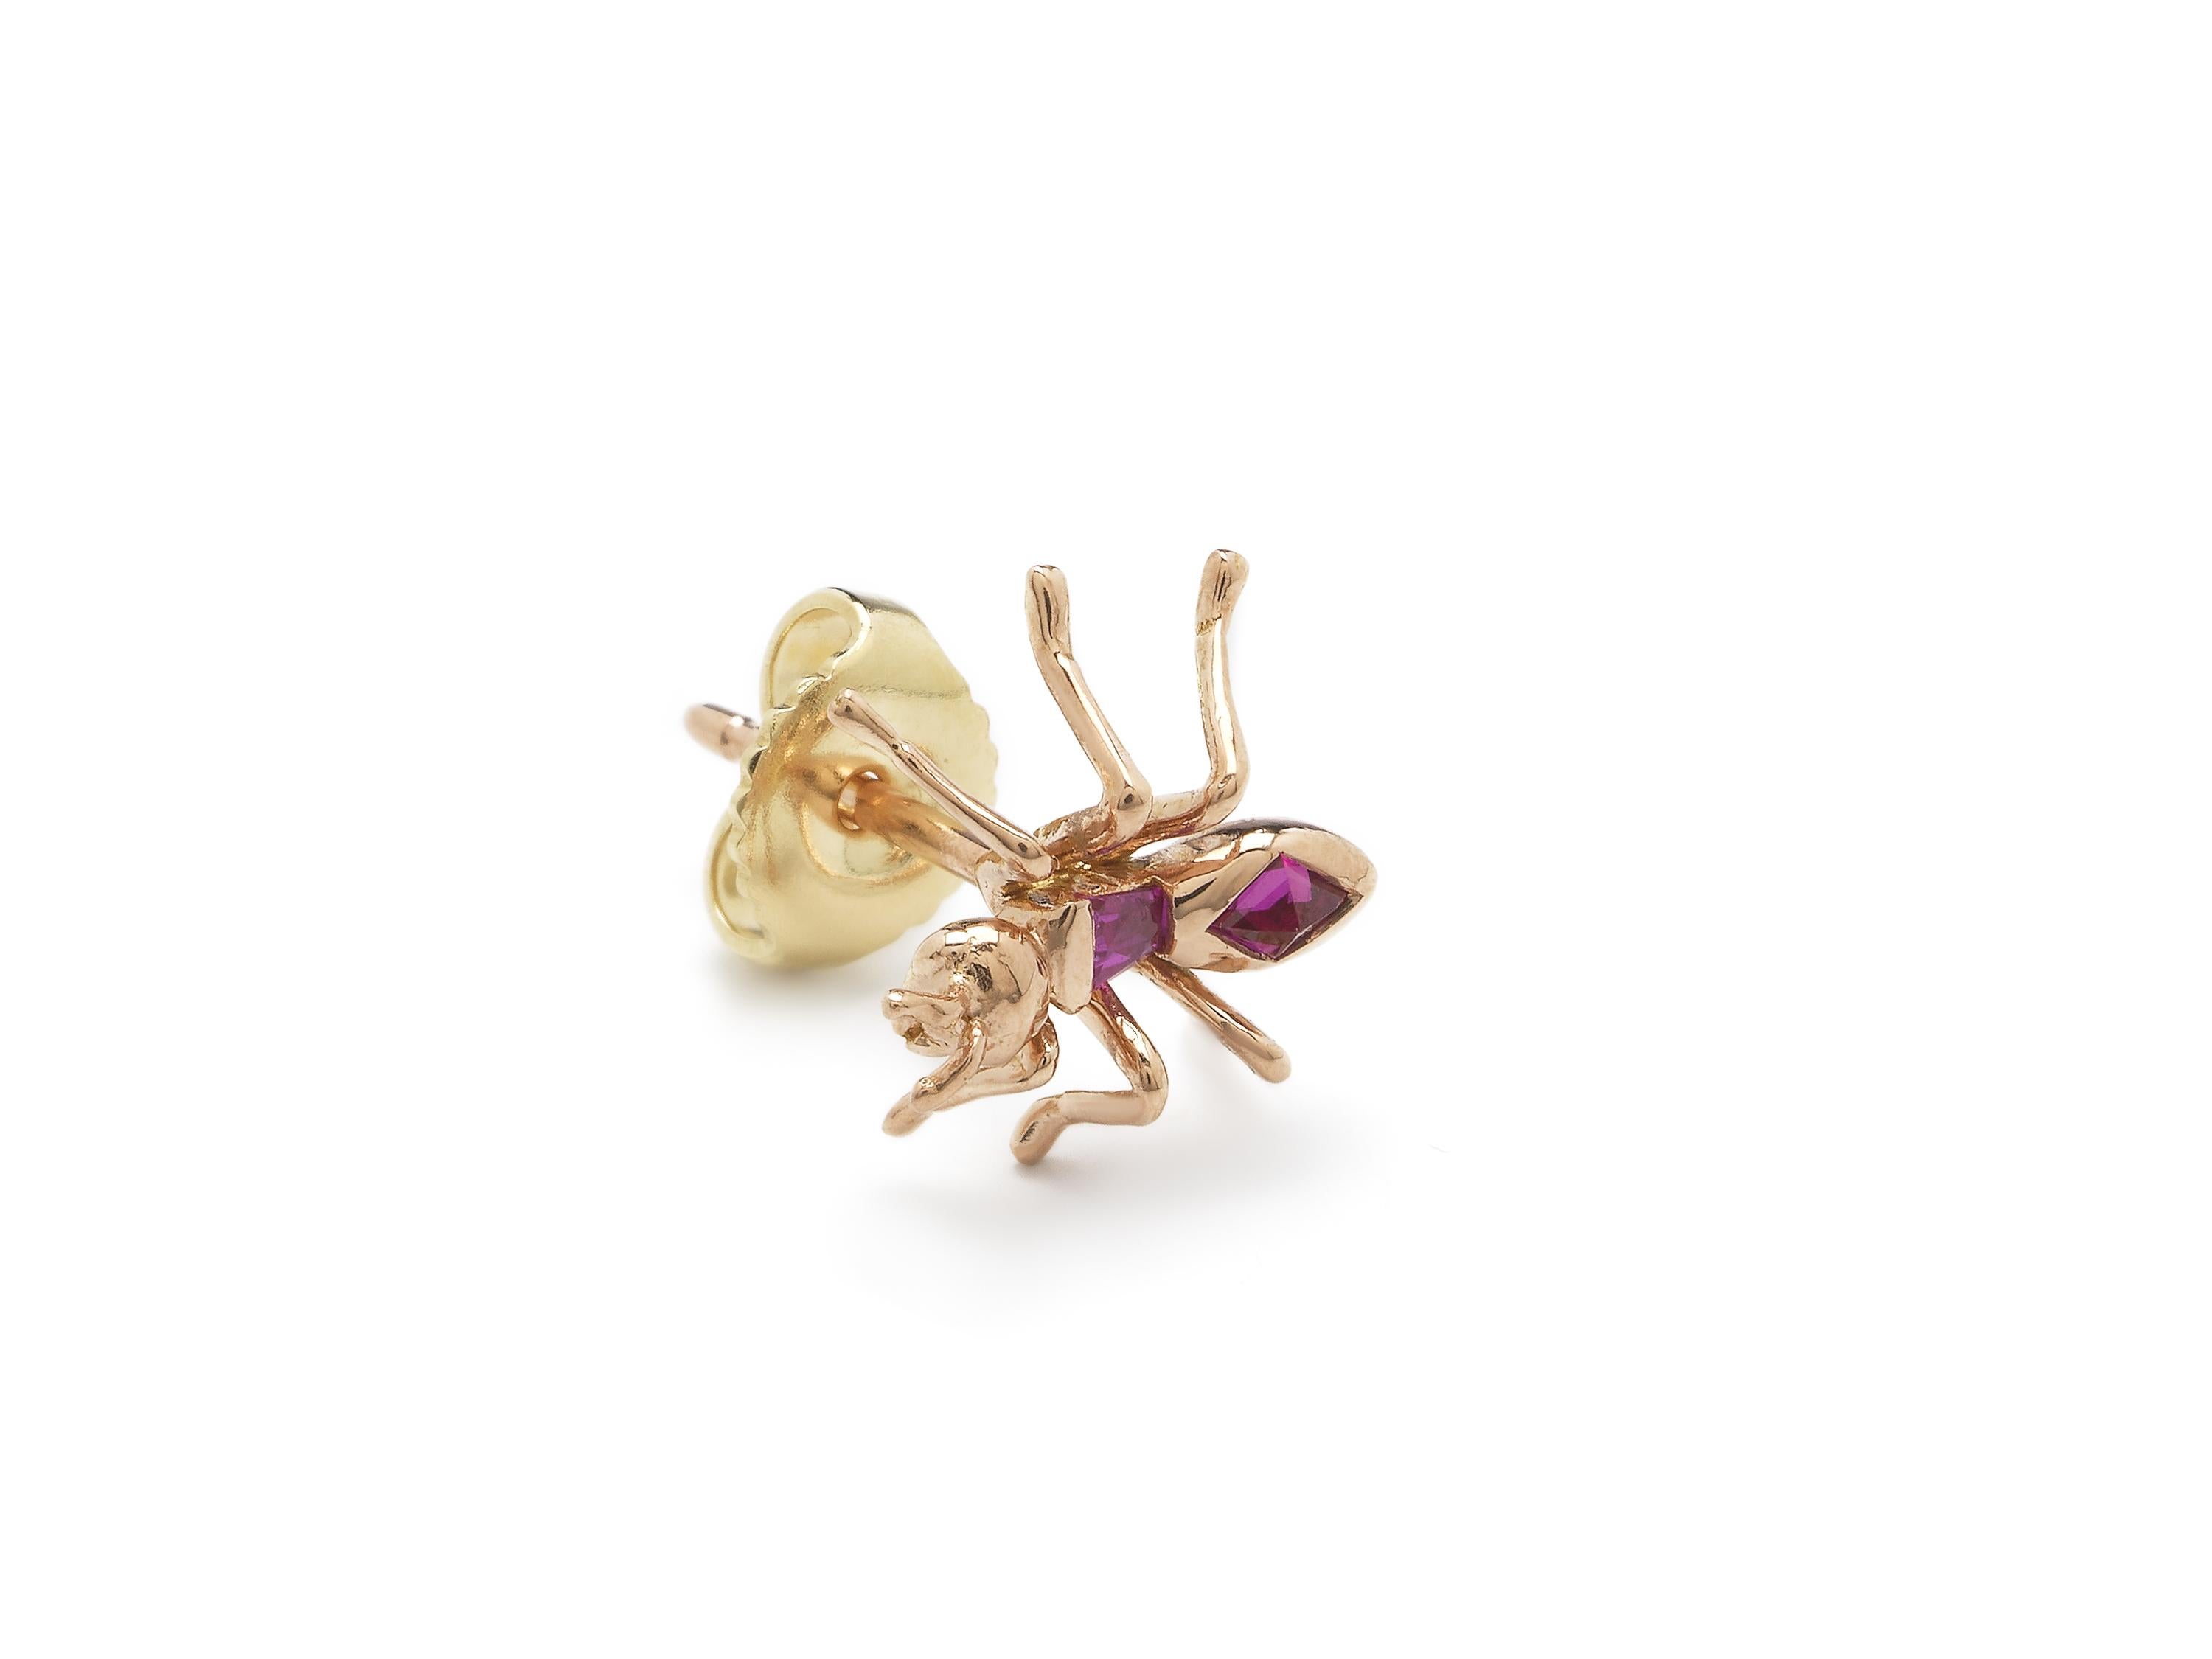 The Ant Stud Earring can be worn alone, or sit alongside multiple piercings in the ear, for a distinctly edgy glamour. The earring is designed in 18k rose gold and set with a tapered, baguette cut ruby on the upper part of its body and a kite-shaped